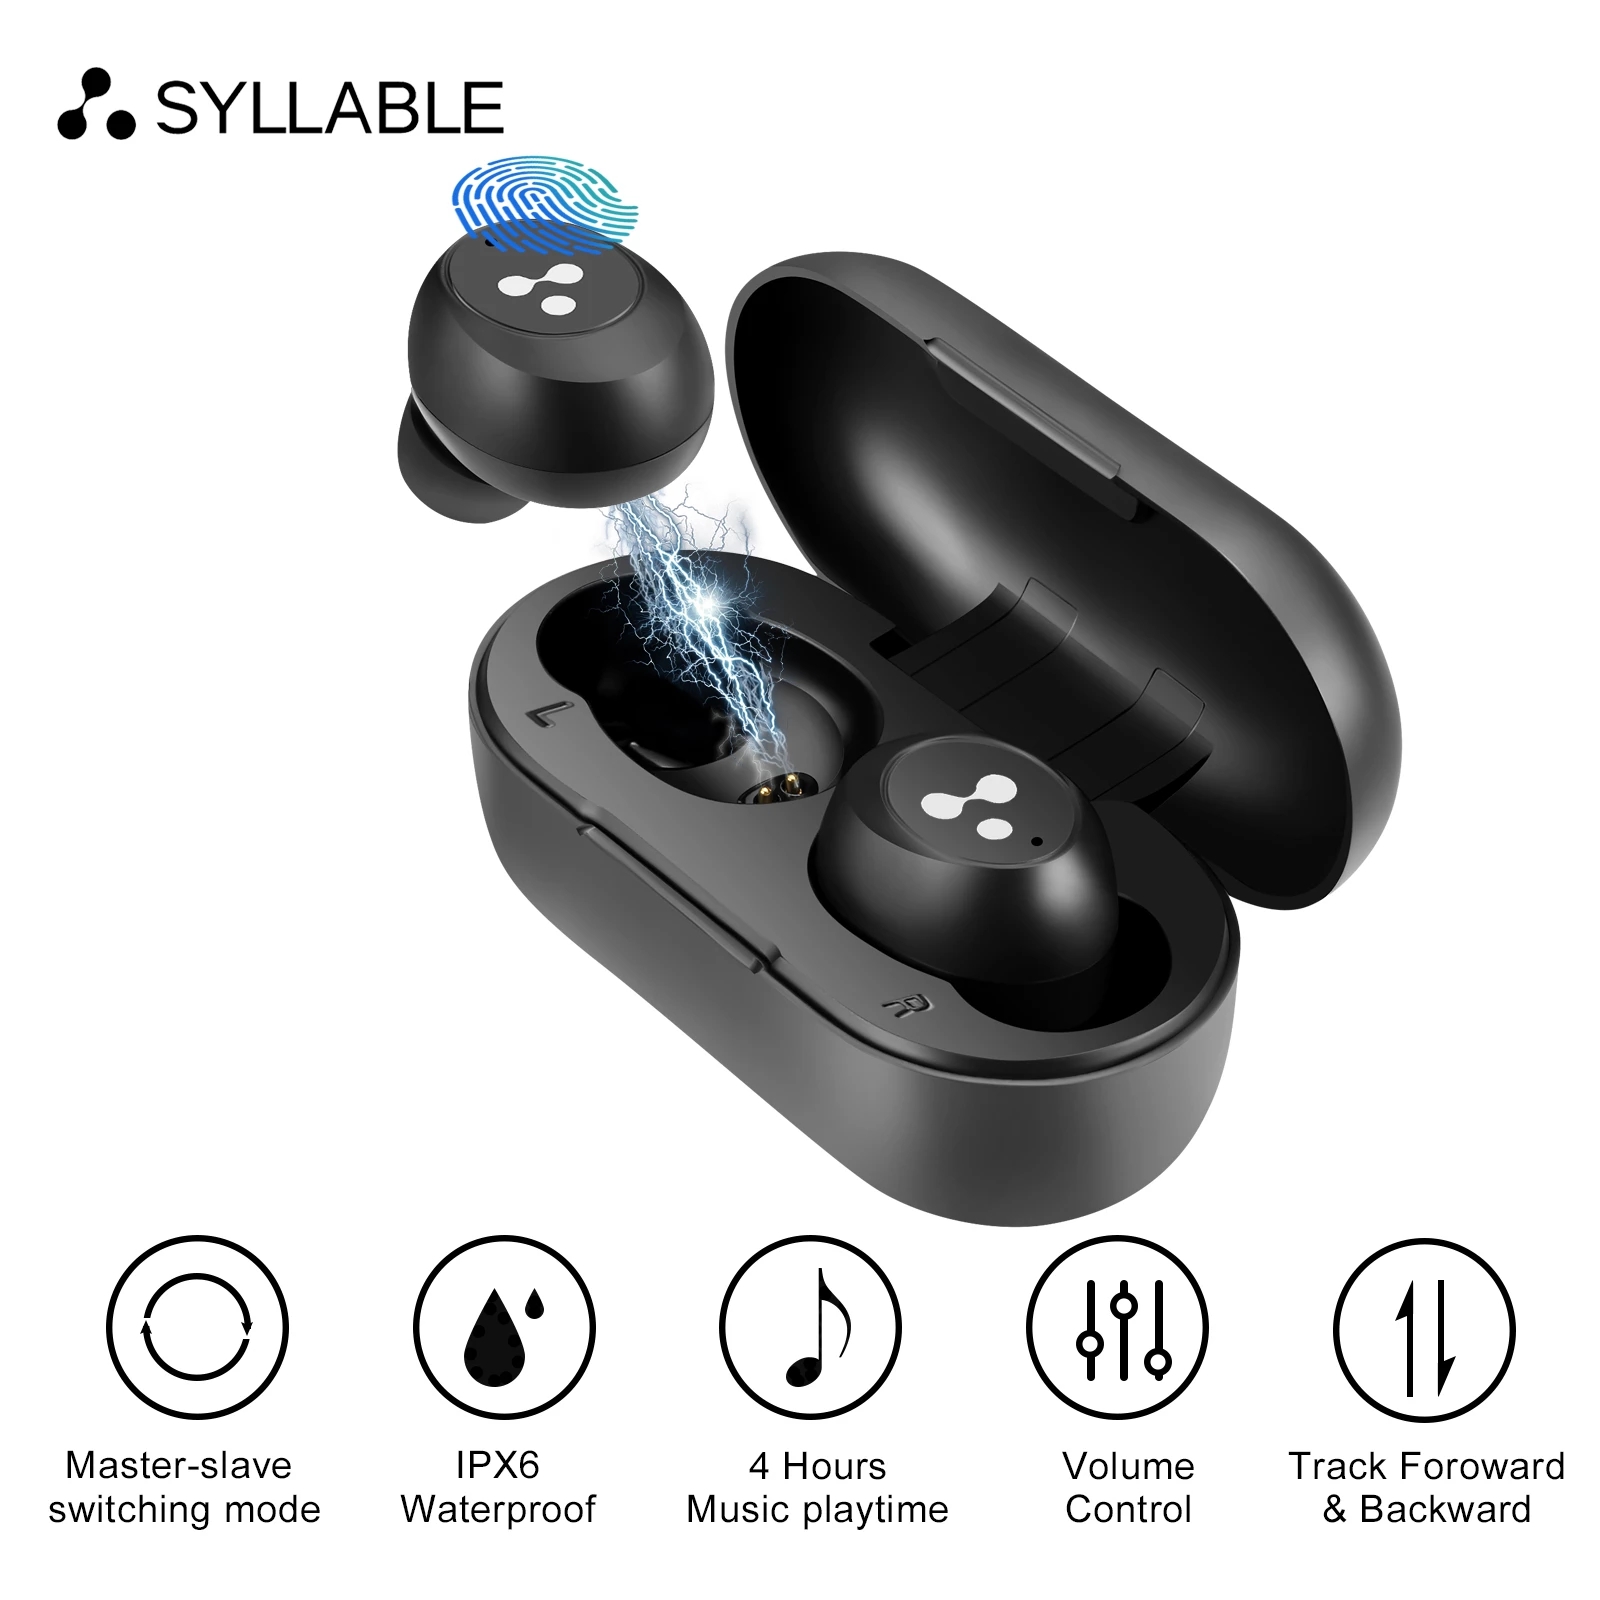 SYLLABLE-S103-TWS-bluetooth-Earphone-Wireless-Stereo-Earbuds-Master-Slave-Switching-Smart-Touch-Wate-1878244-1